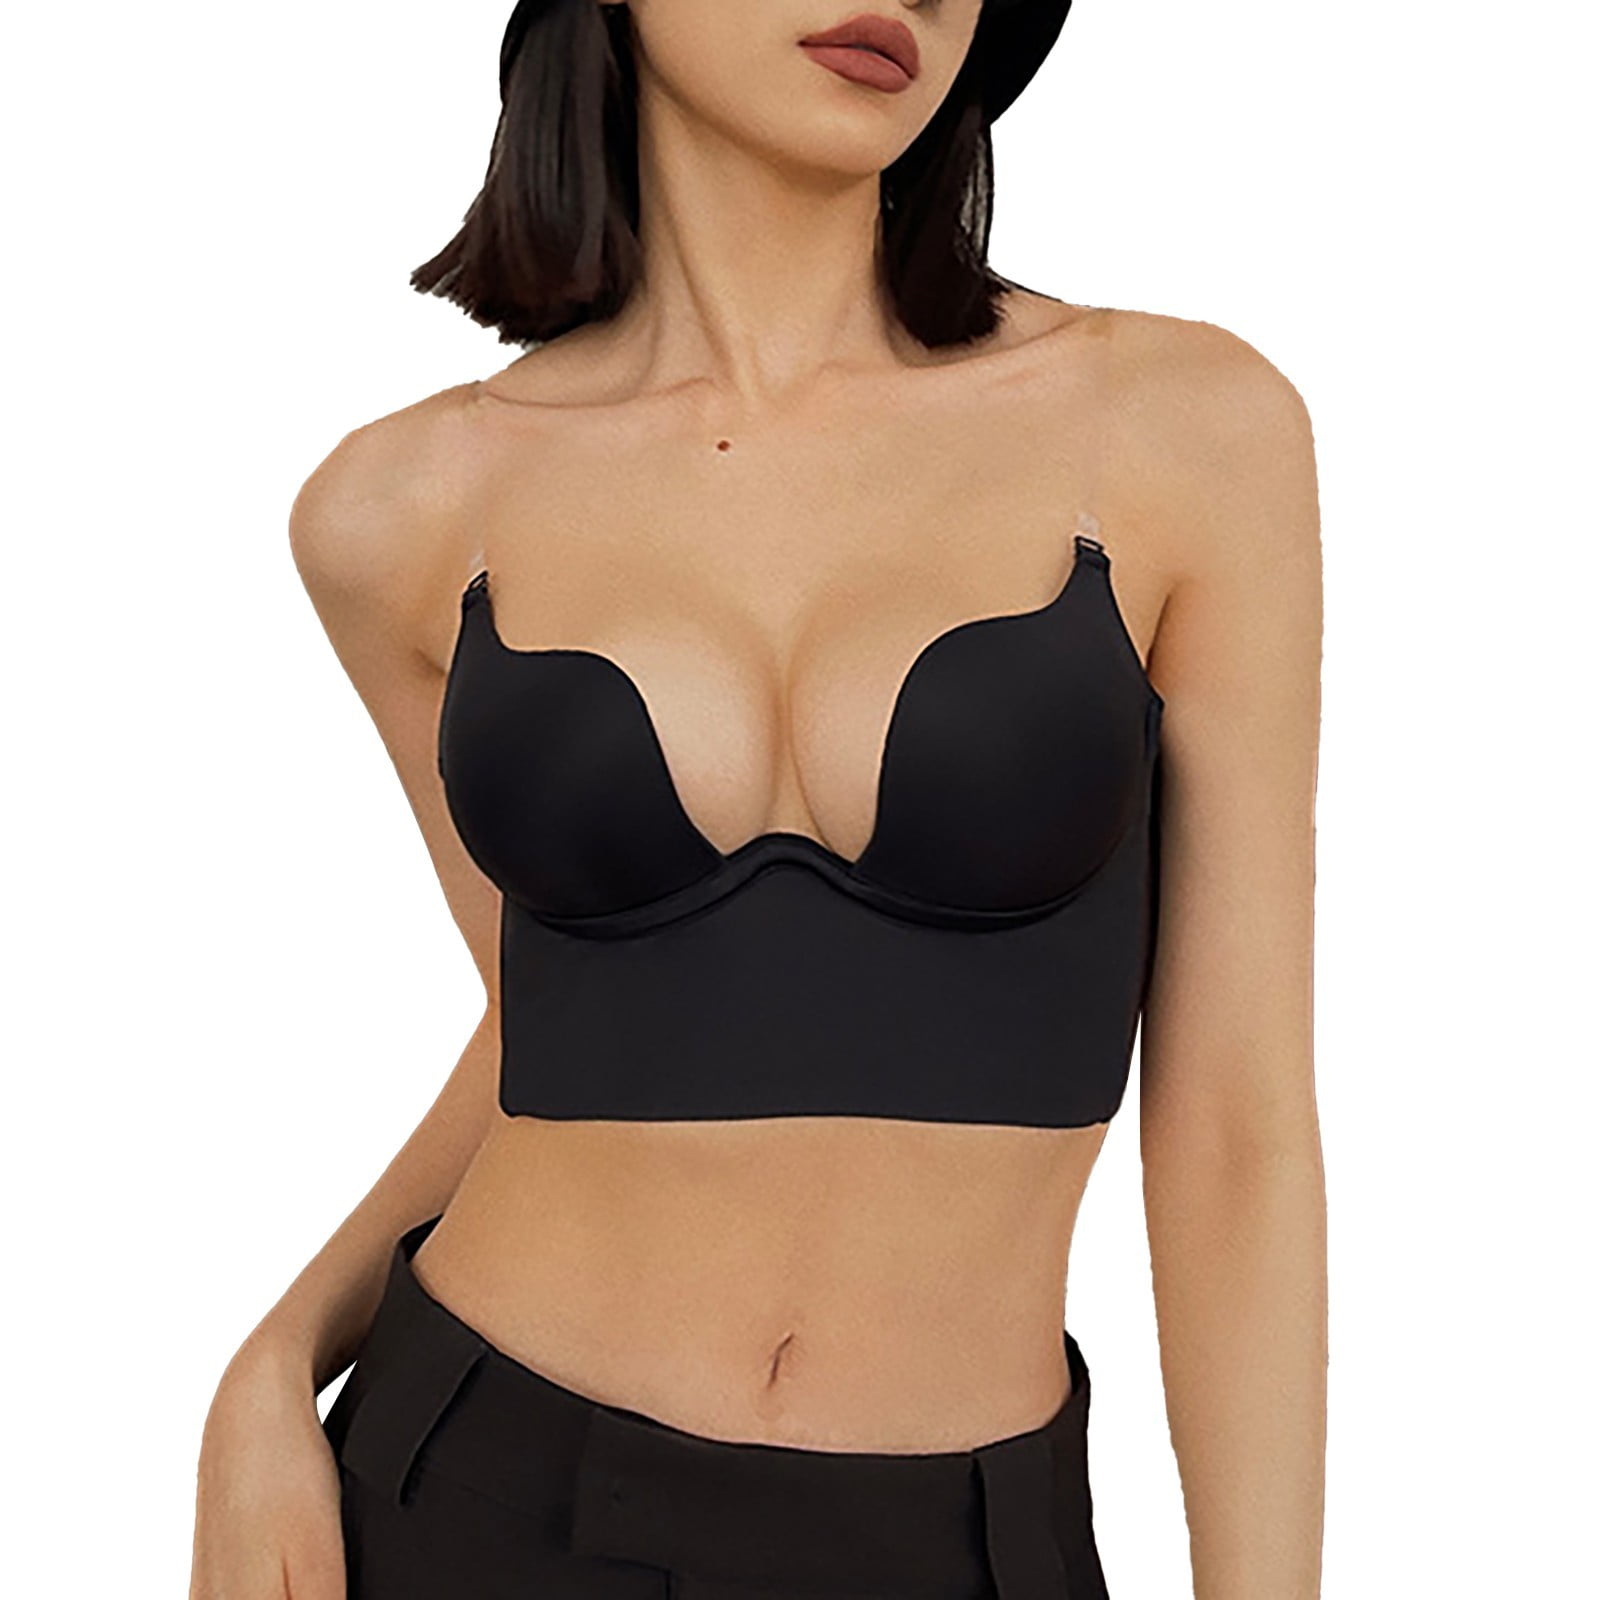  ZORQ Women's Low Back Bra, Low Cut Underwire Push Up Bra,  Invisible Deep v Backless Bras, Sexy U Shaped Back Bralette (Color : Black,  Size : 90/40D) : Clothing, Shoes & Jewelry